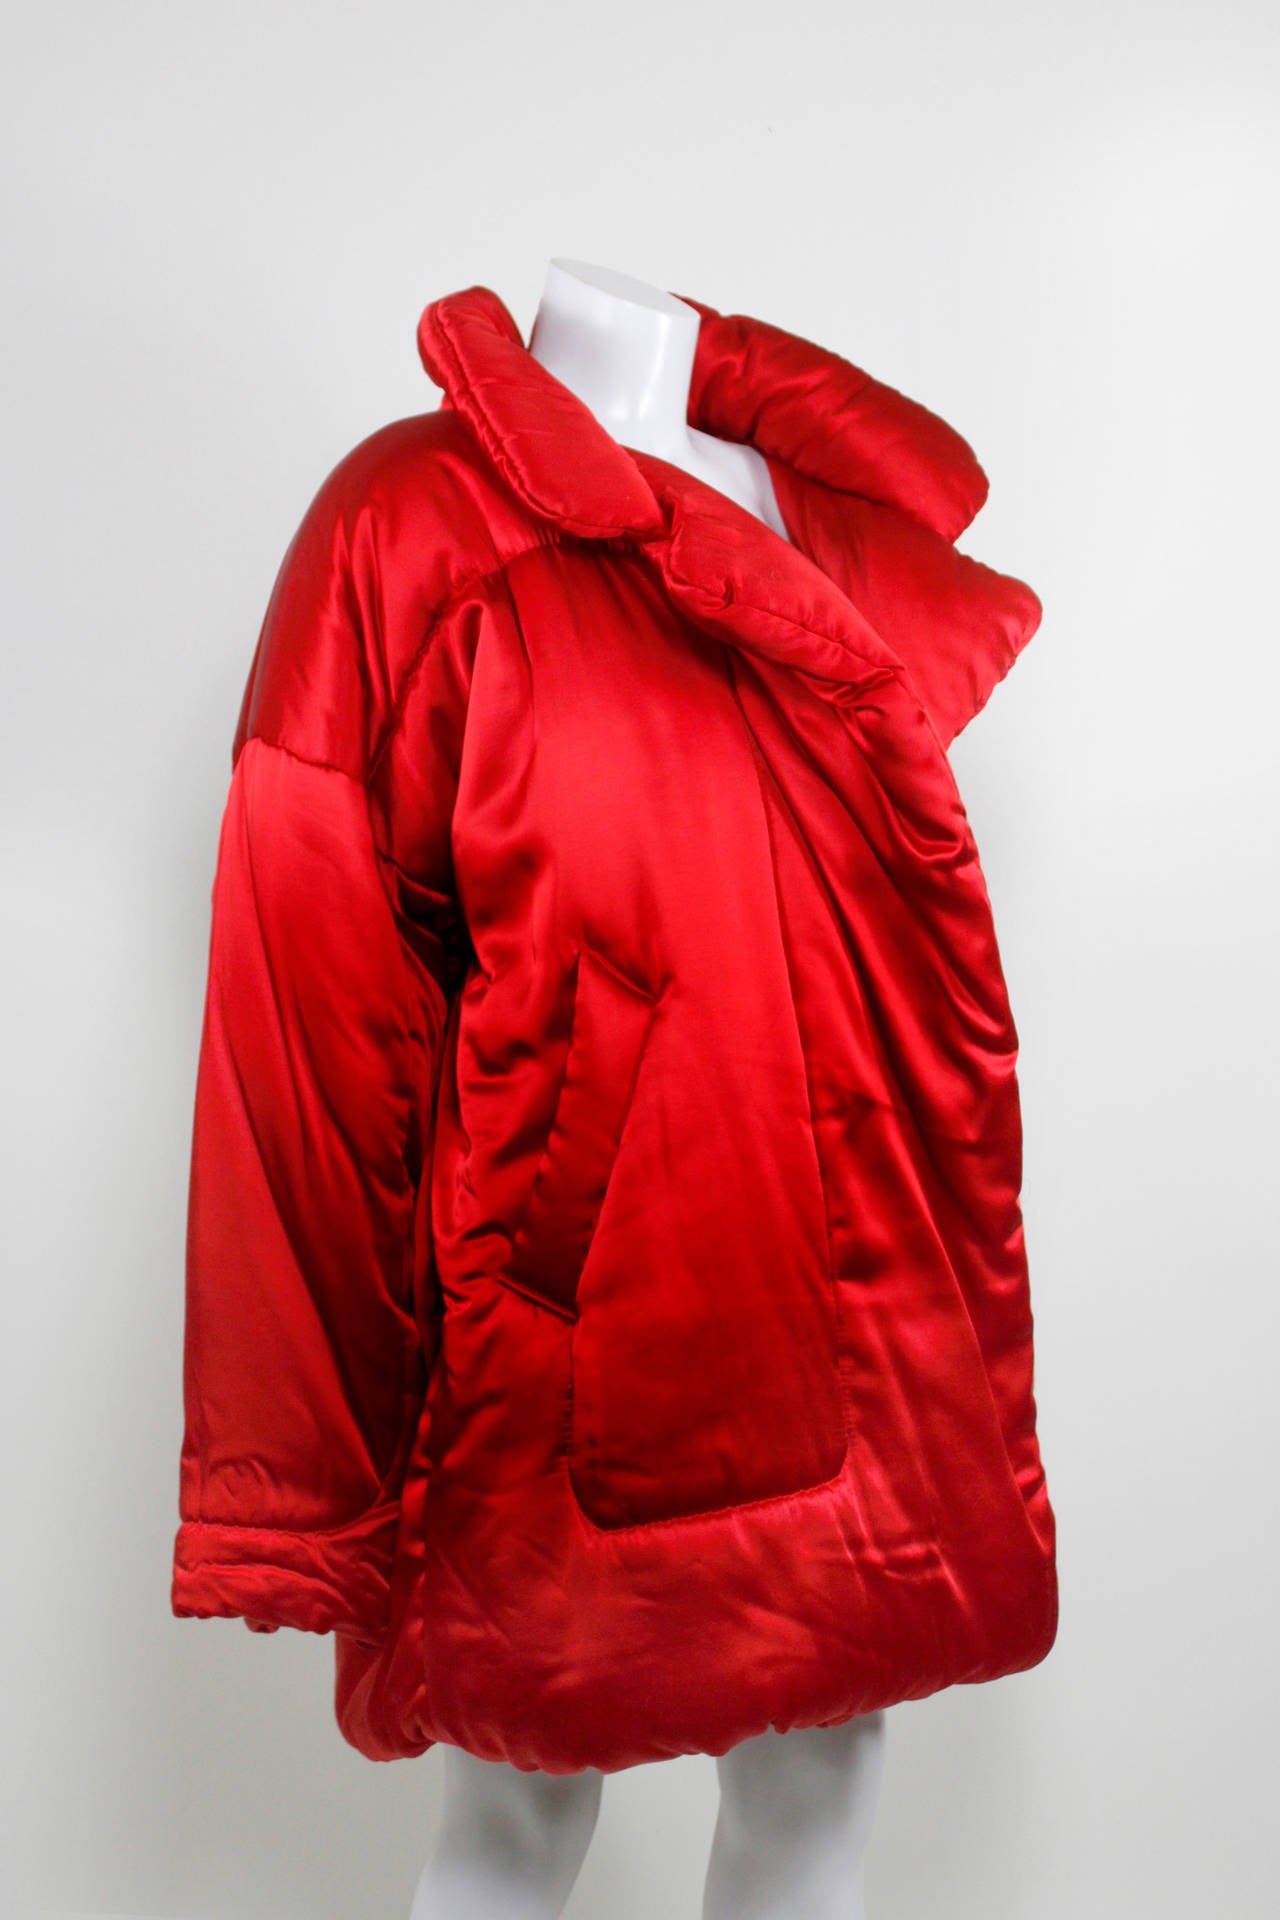 This fabulous jacket is the iconic Norma Kamali sleeping bag car coat. Made with a special blend of rayon and acetate, the finish resembles a luxurious satin.